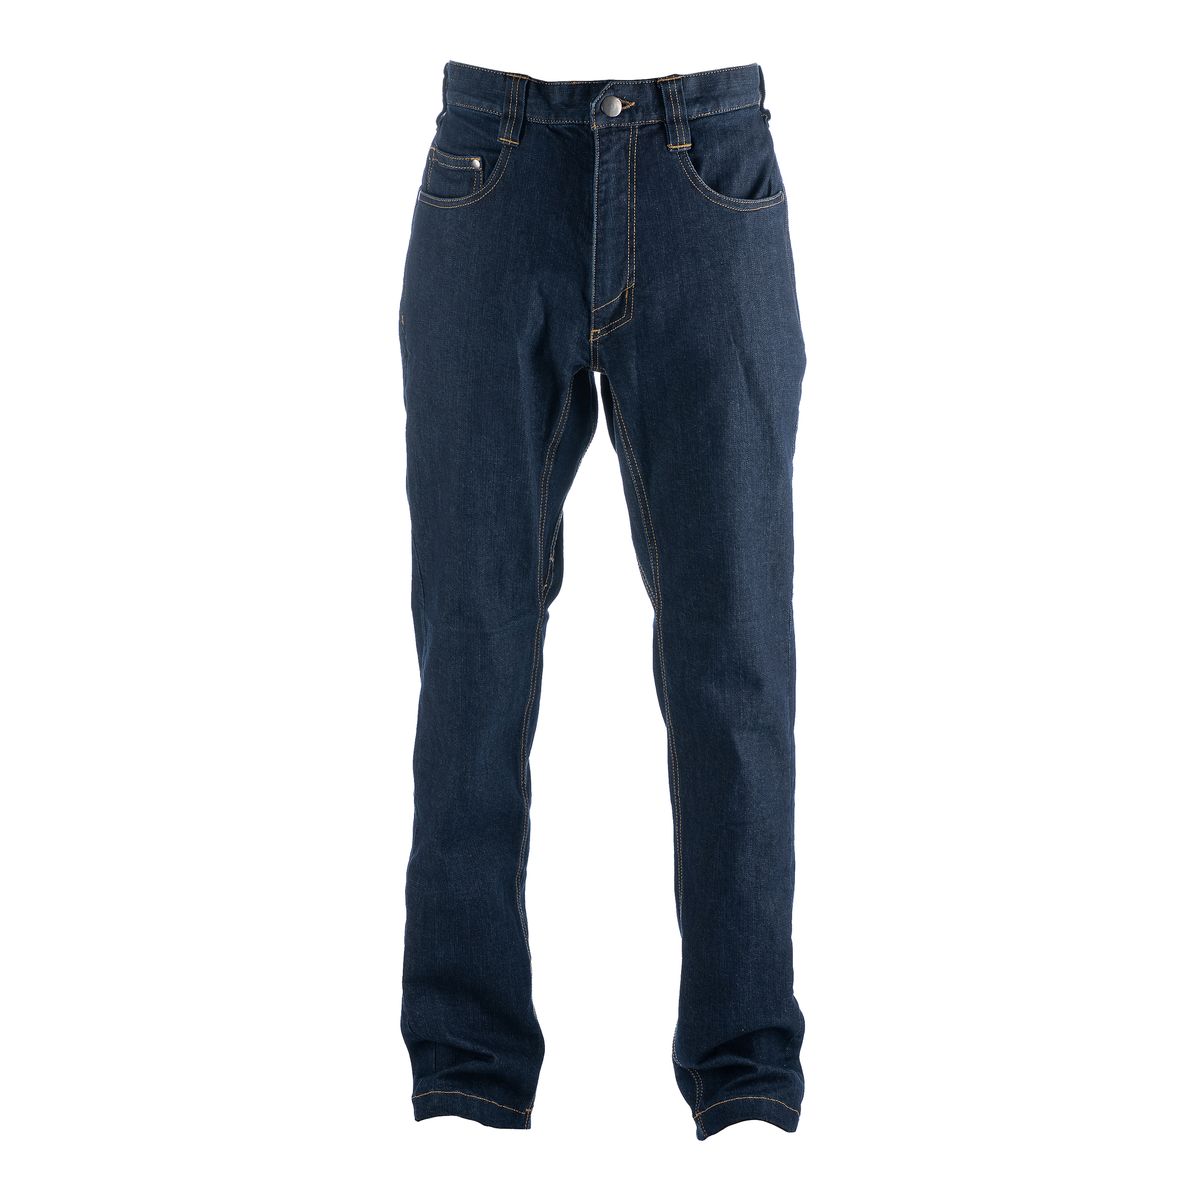 Matoska Tactical Jeans | Buy Online in South Africa | takealot.com